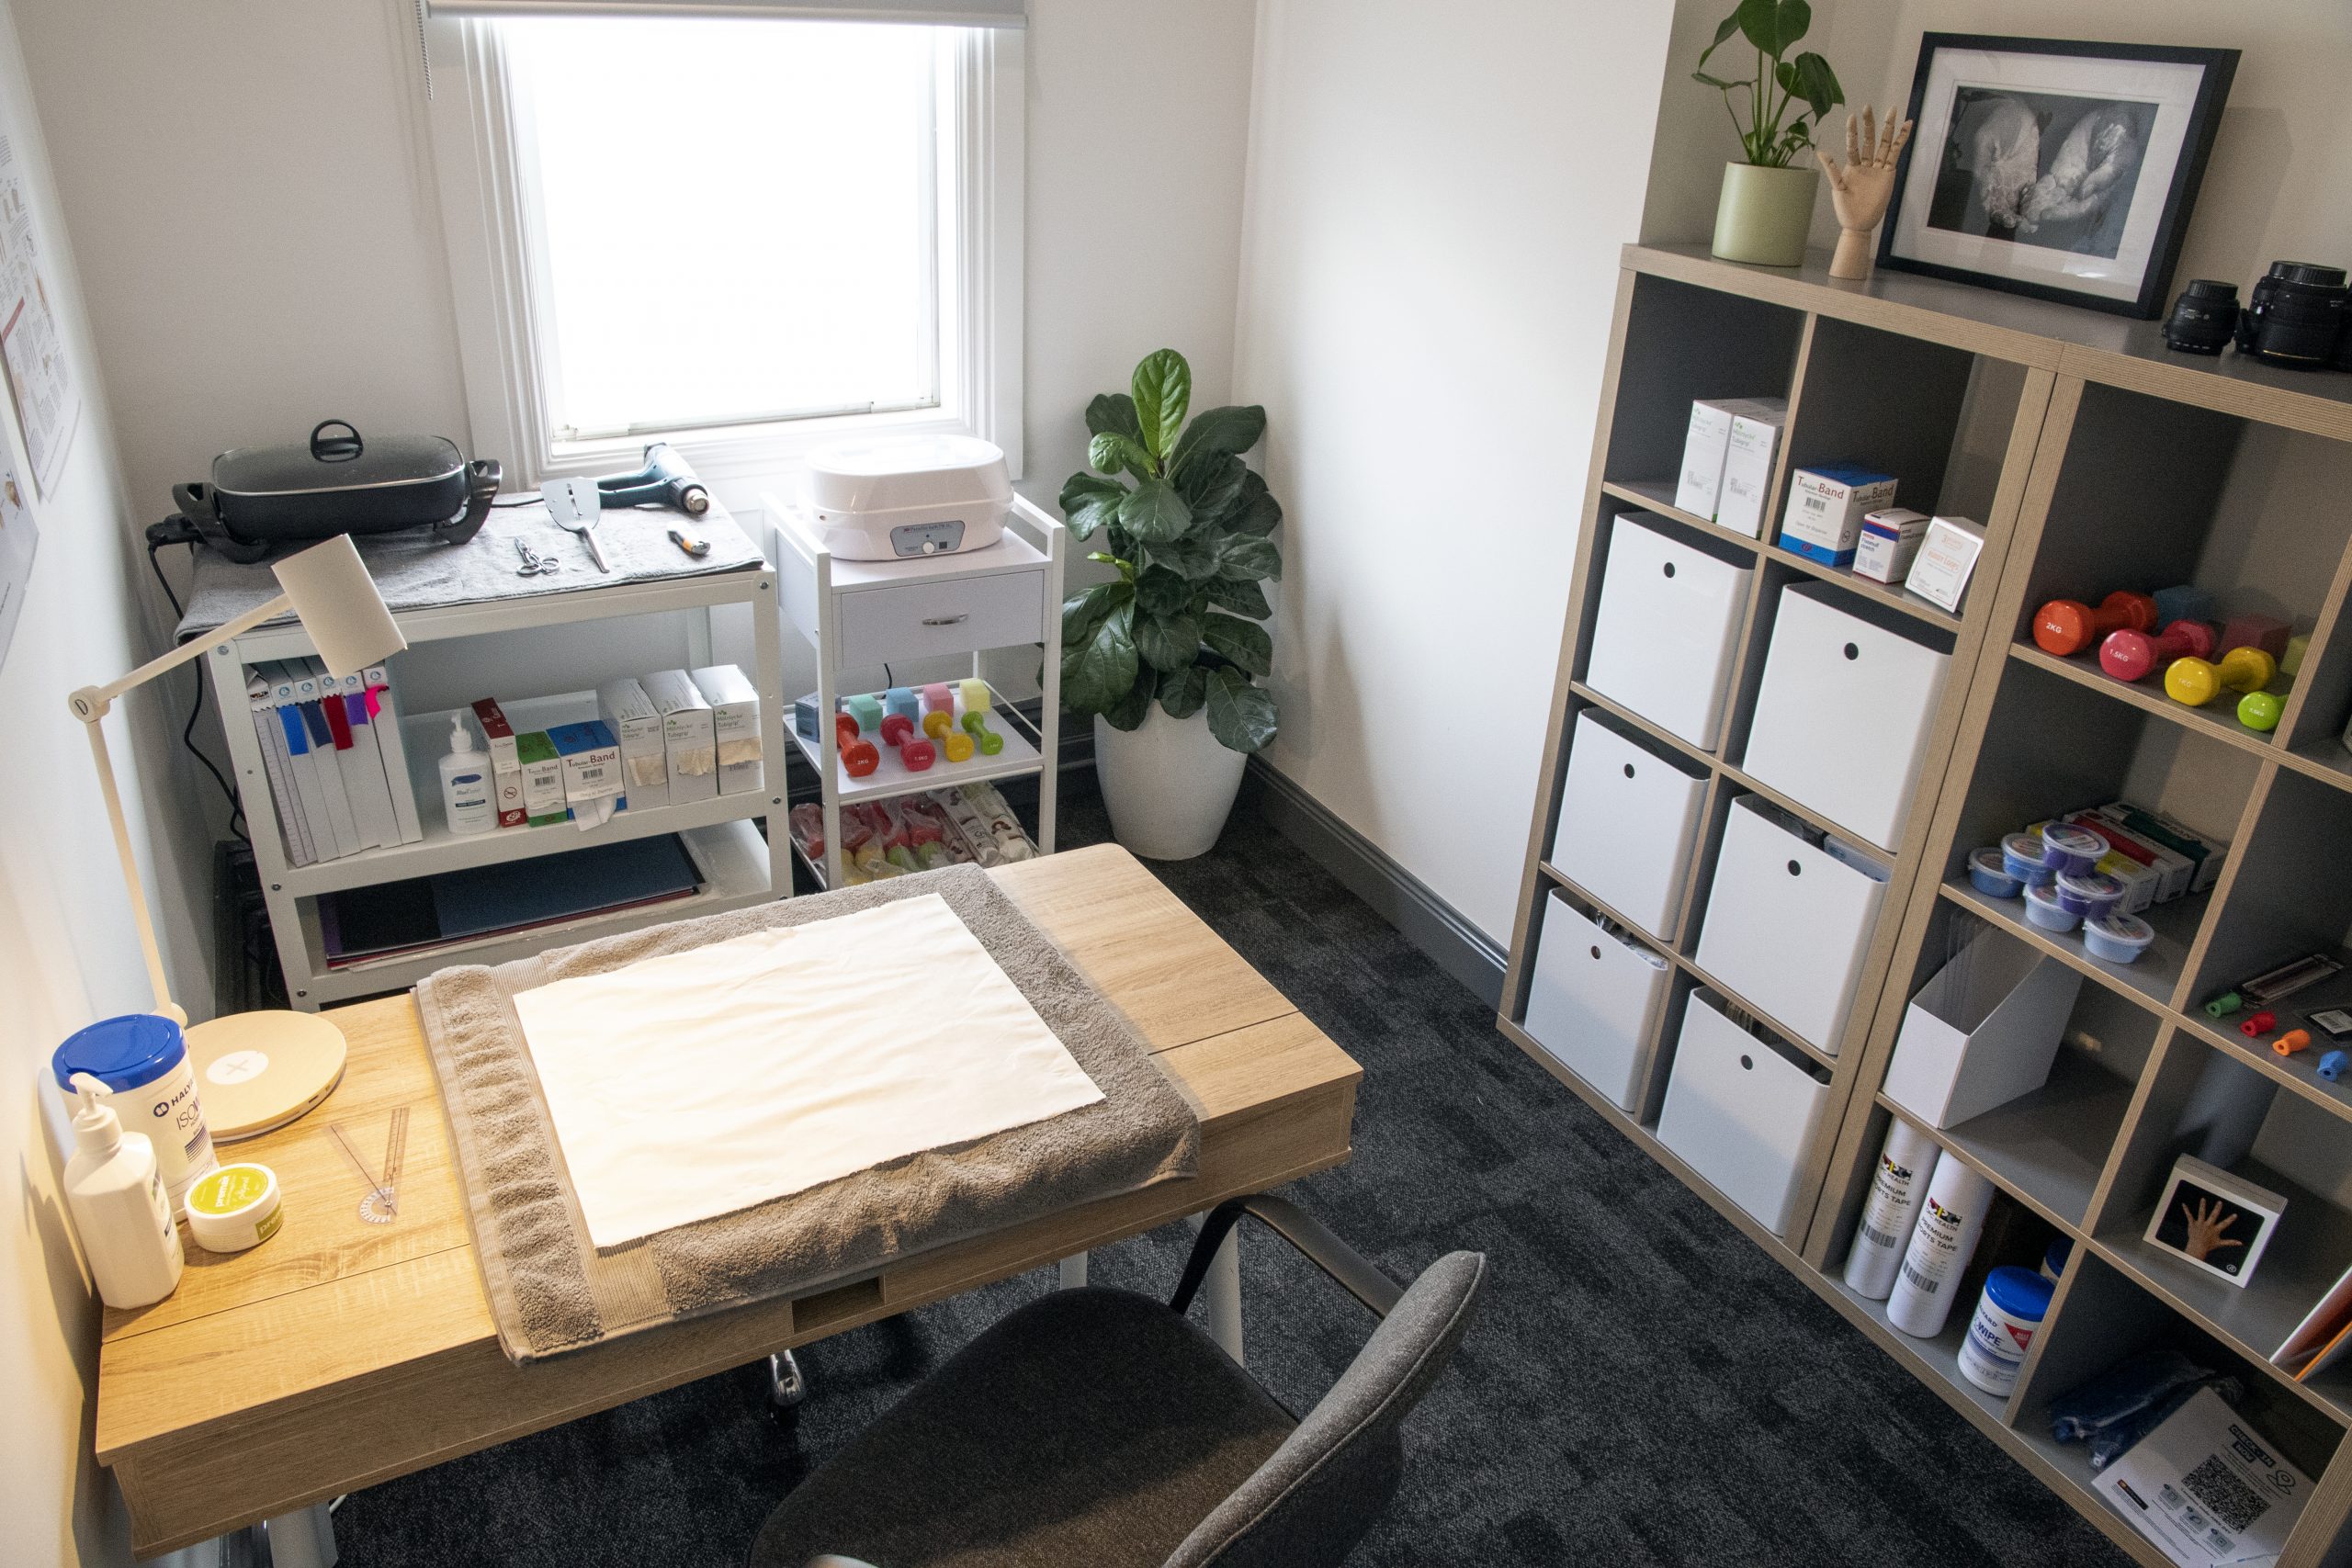 Complete Hand Therapy Room